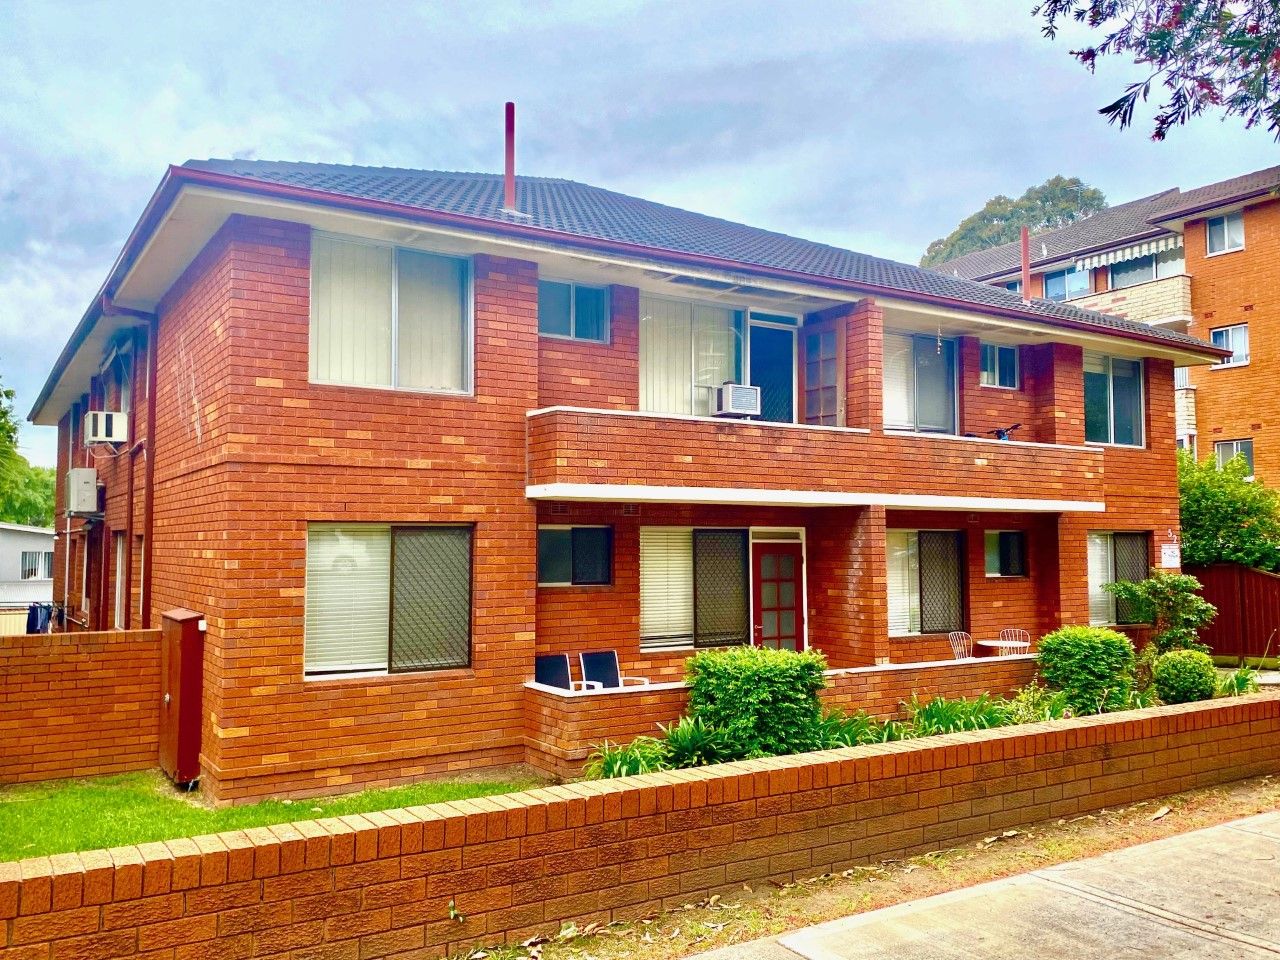 2 bedrooms Apartment / Unit / Flat in 2/52 Station Street MORTDALE NSW, 2223